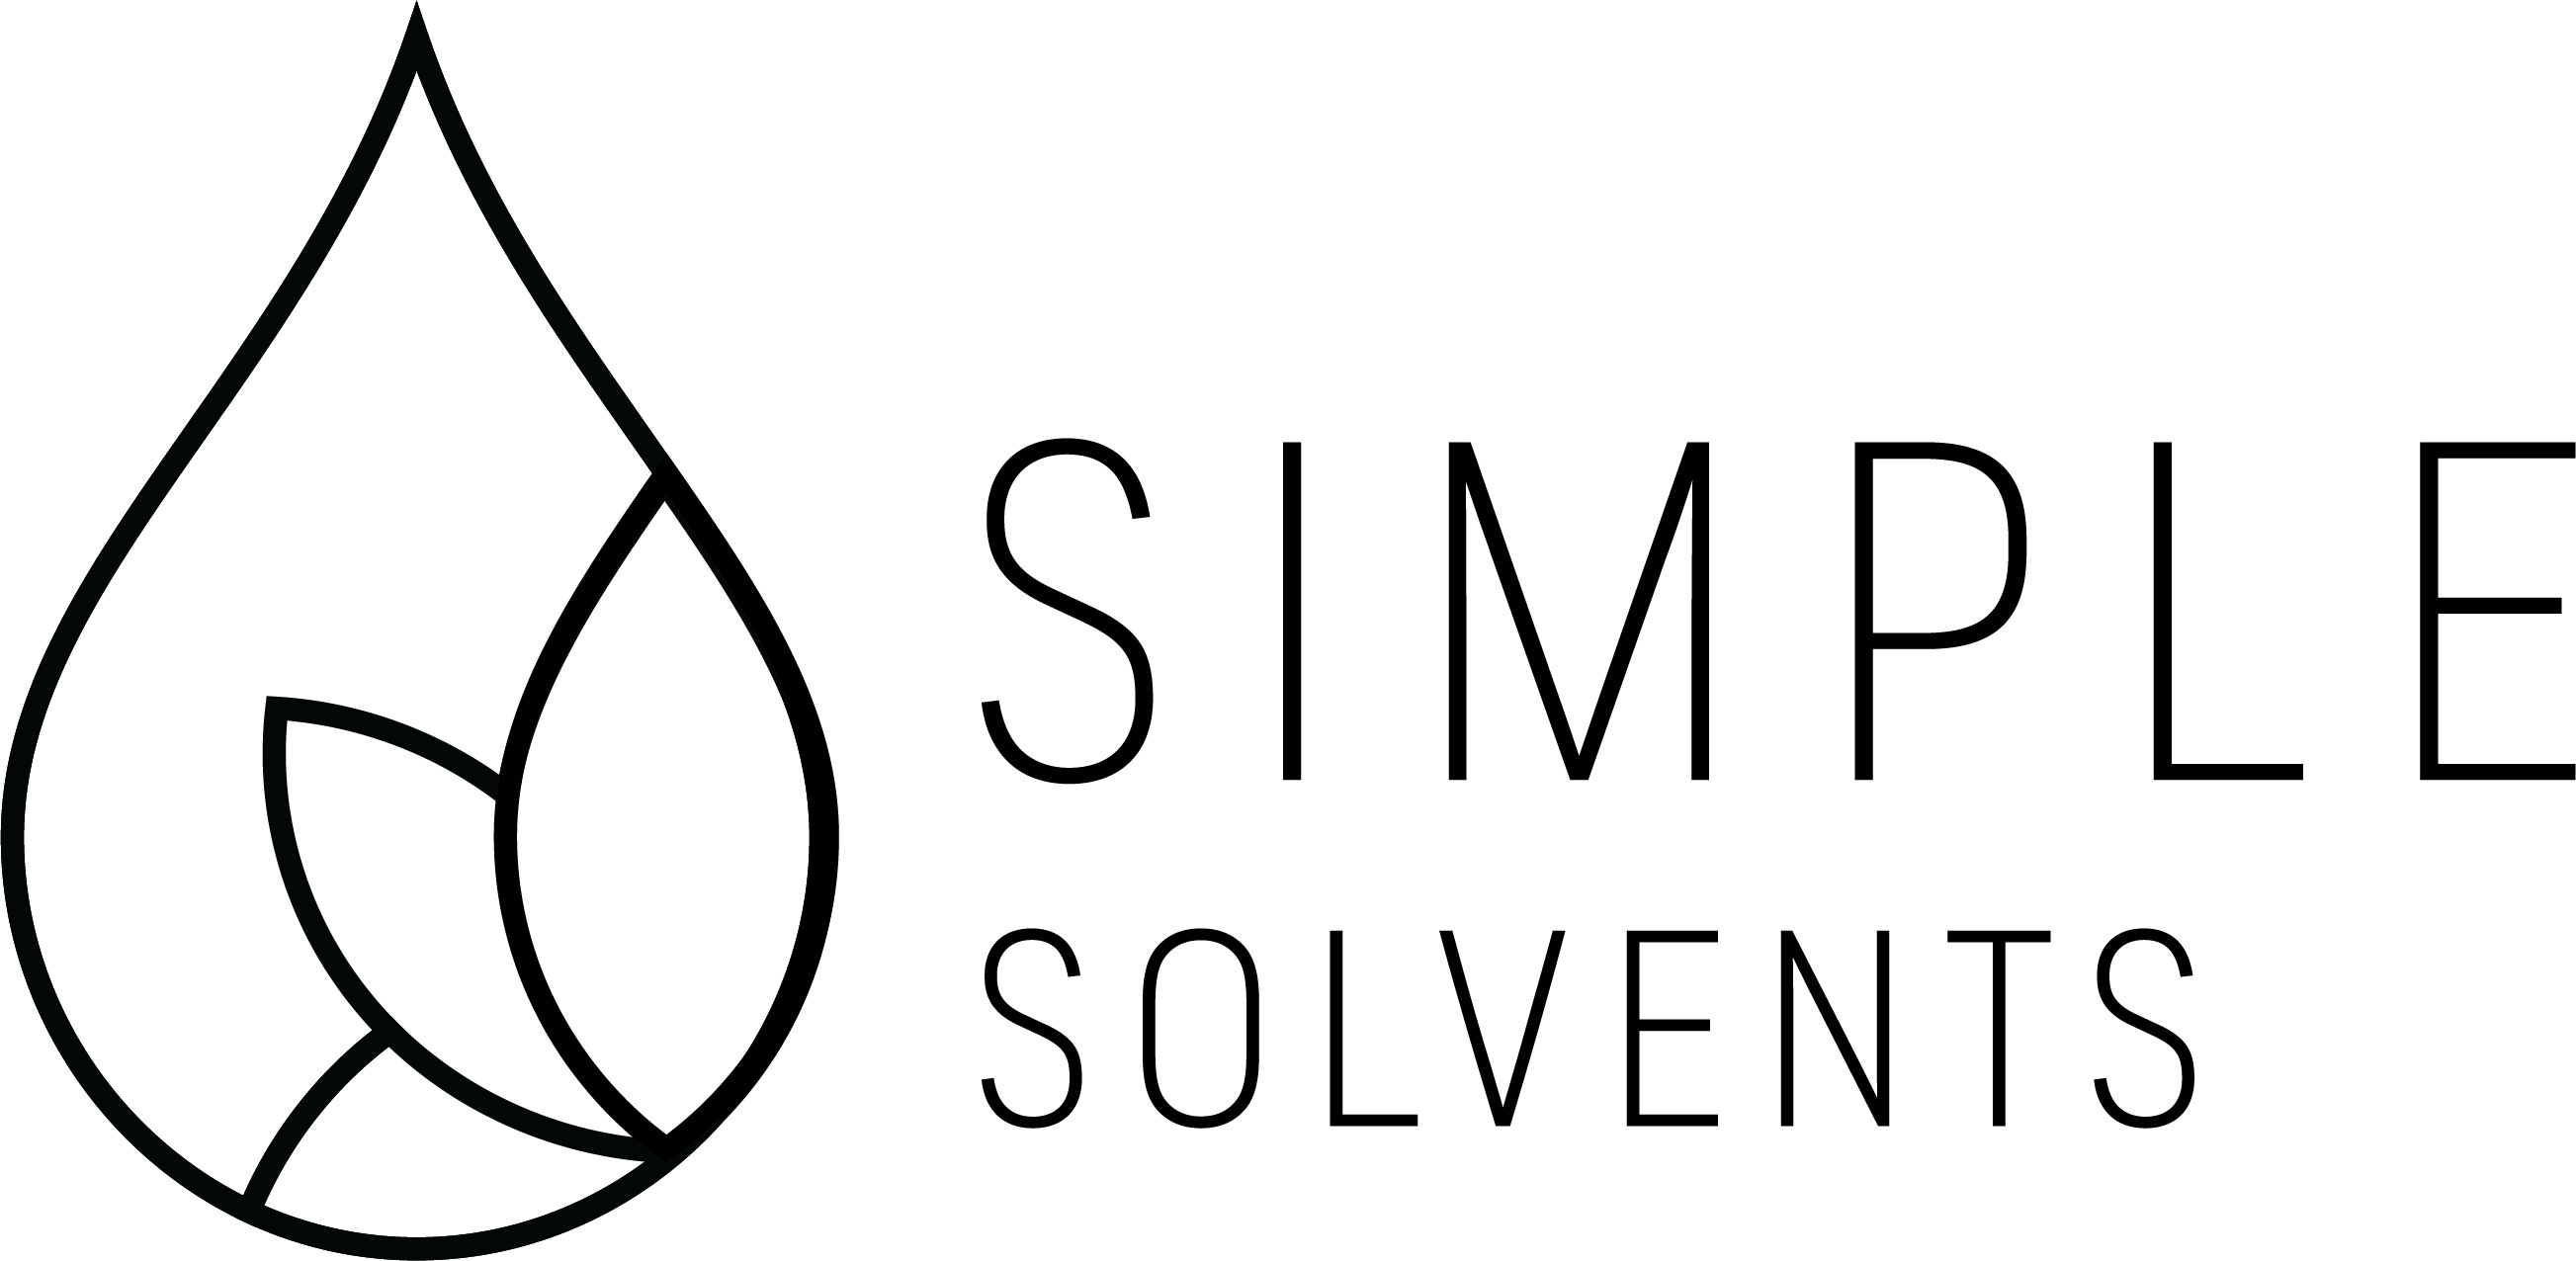 Simple Solvents